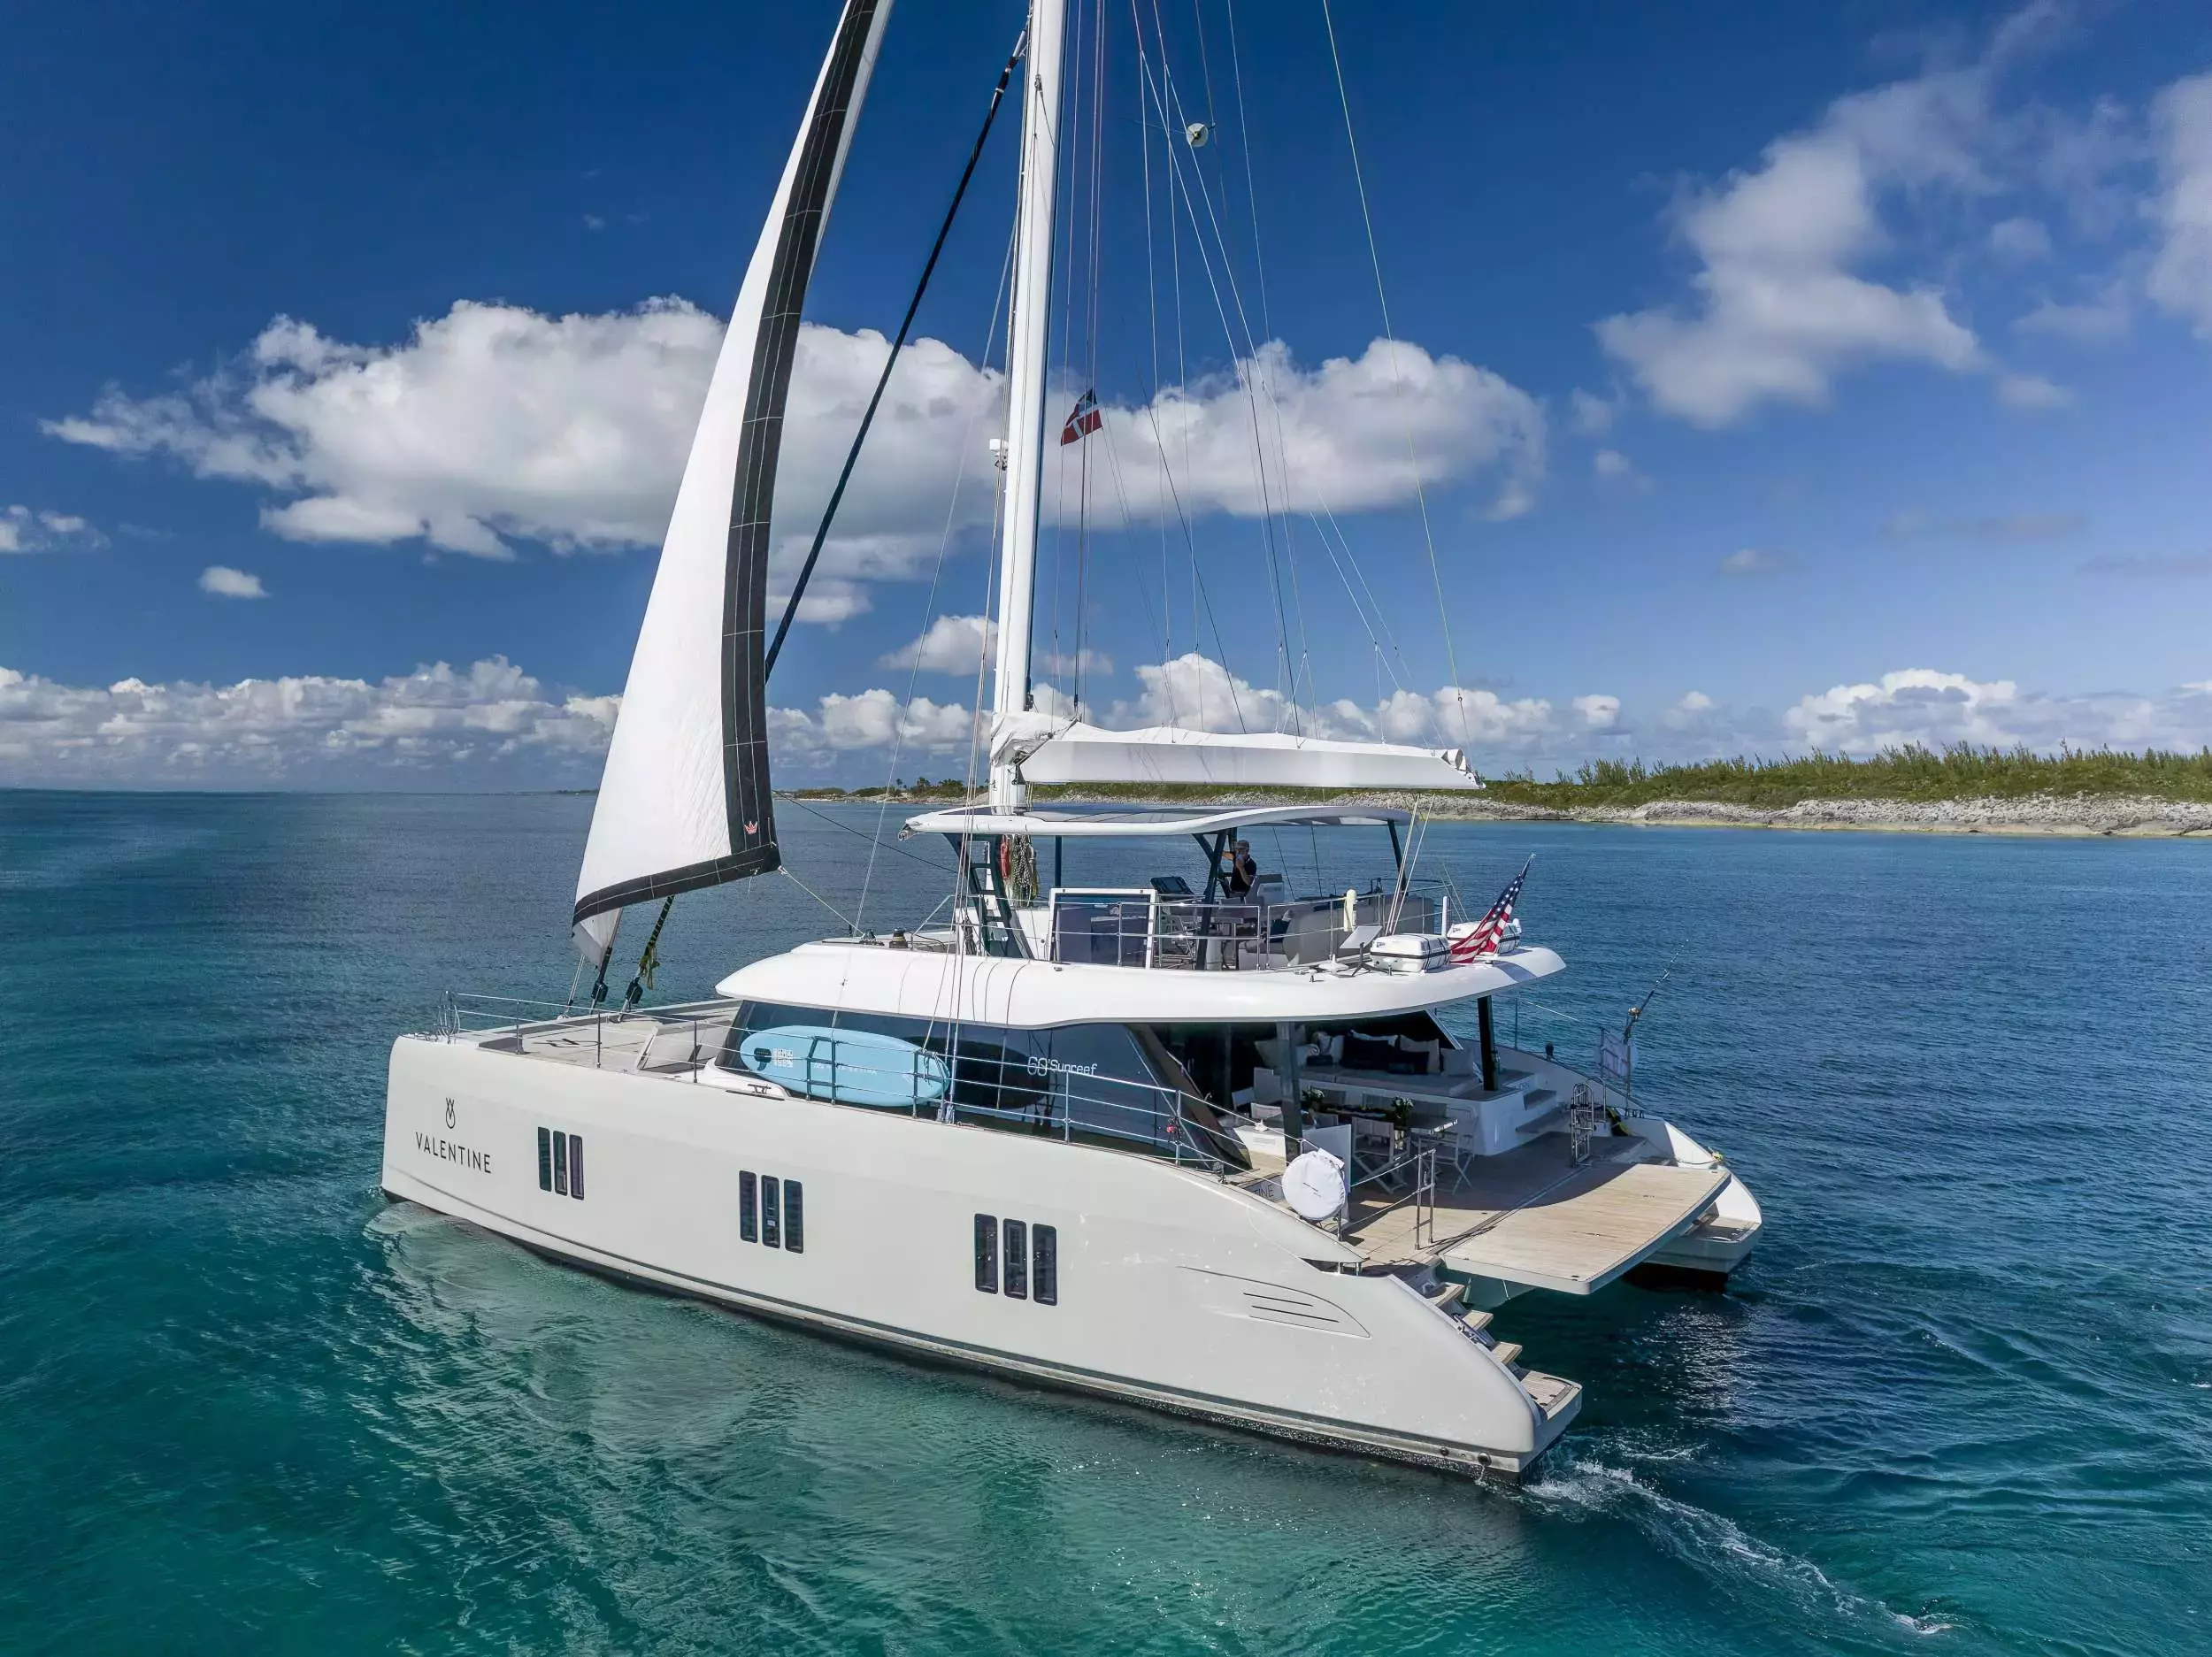 Valentine by Sunreef Yachts - Special Offer for a private Power Catamaran Charter in Virgin Gorda with a crew